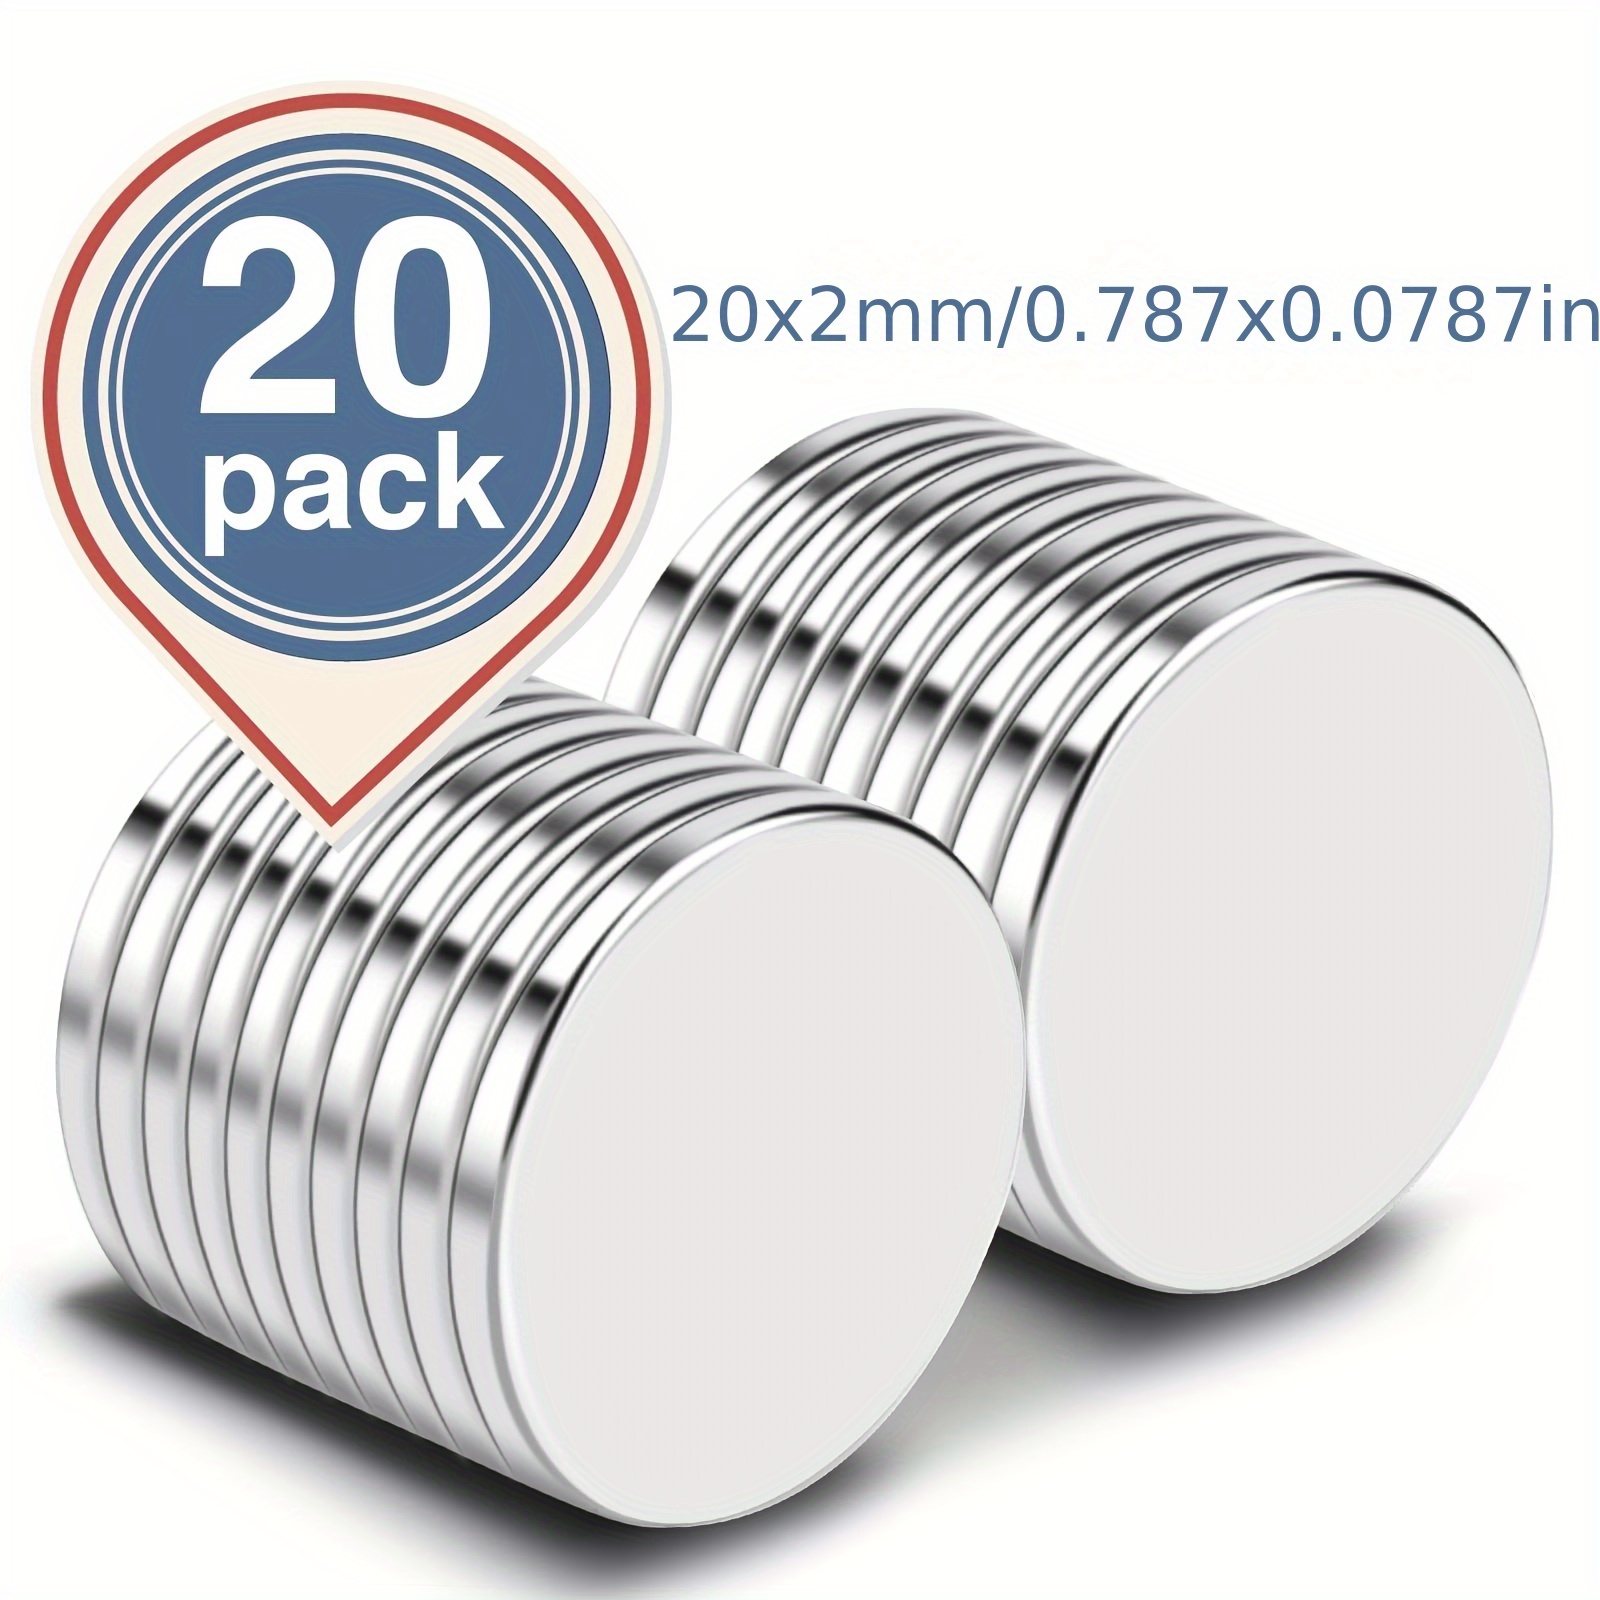 30 PCS Small Magnets 10x2mm, Neodymium Magnet Round, Strong Magnets, Fridge  Magnets Adult for Whiteboard, Fridge, Home, Kitchen, Office